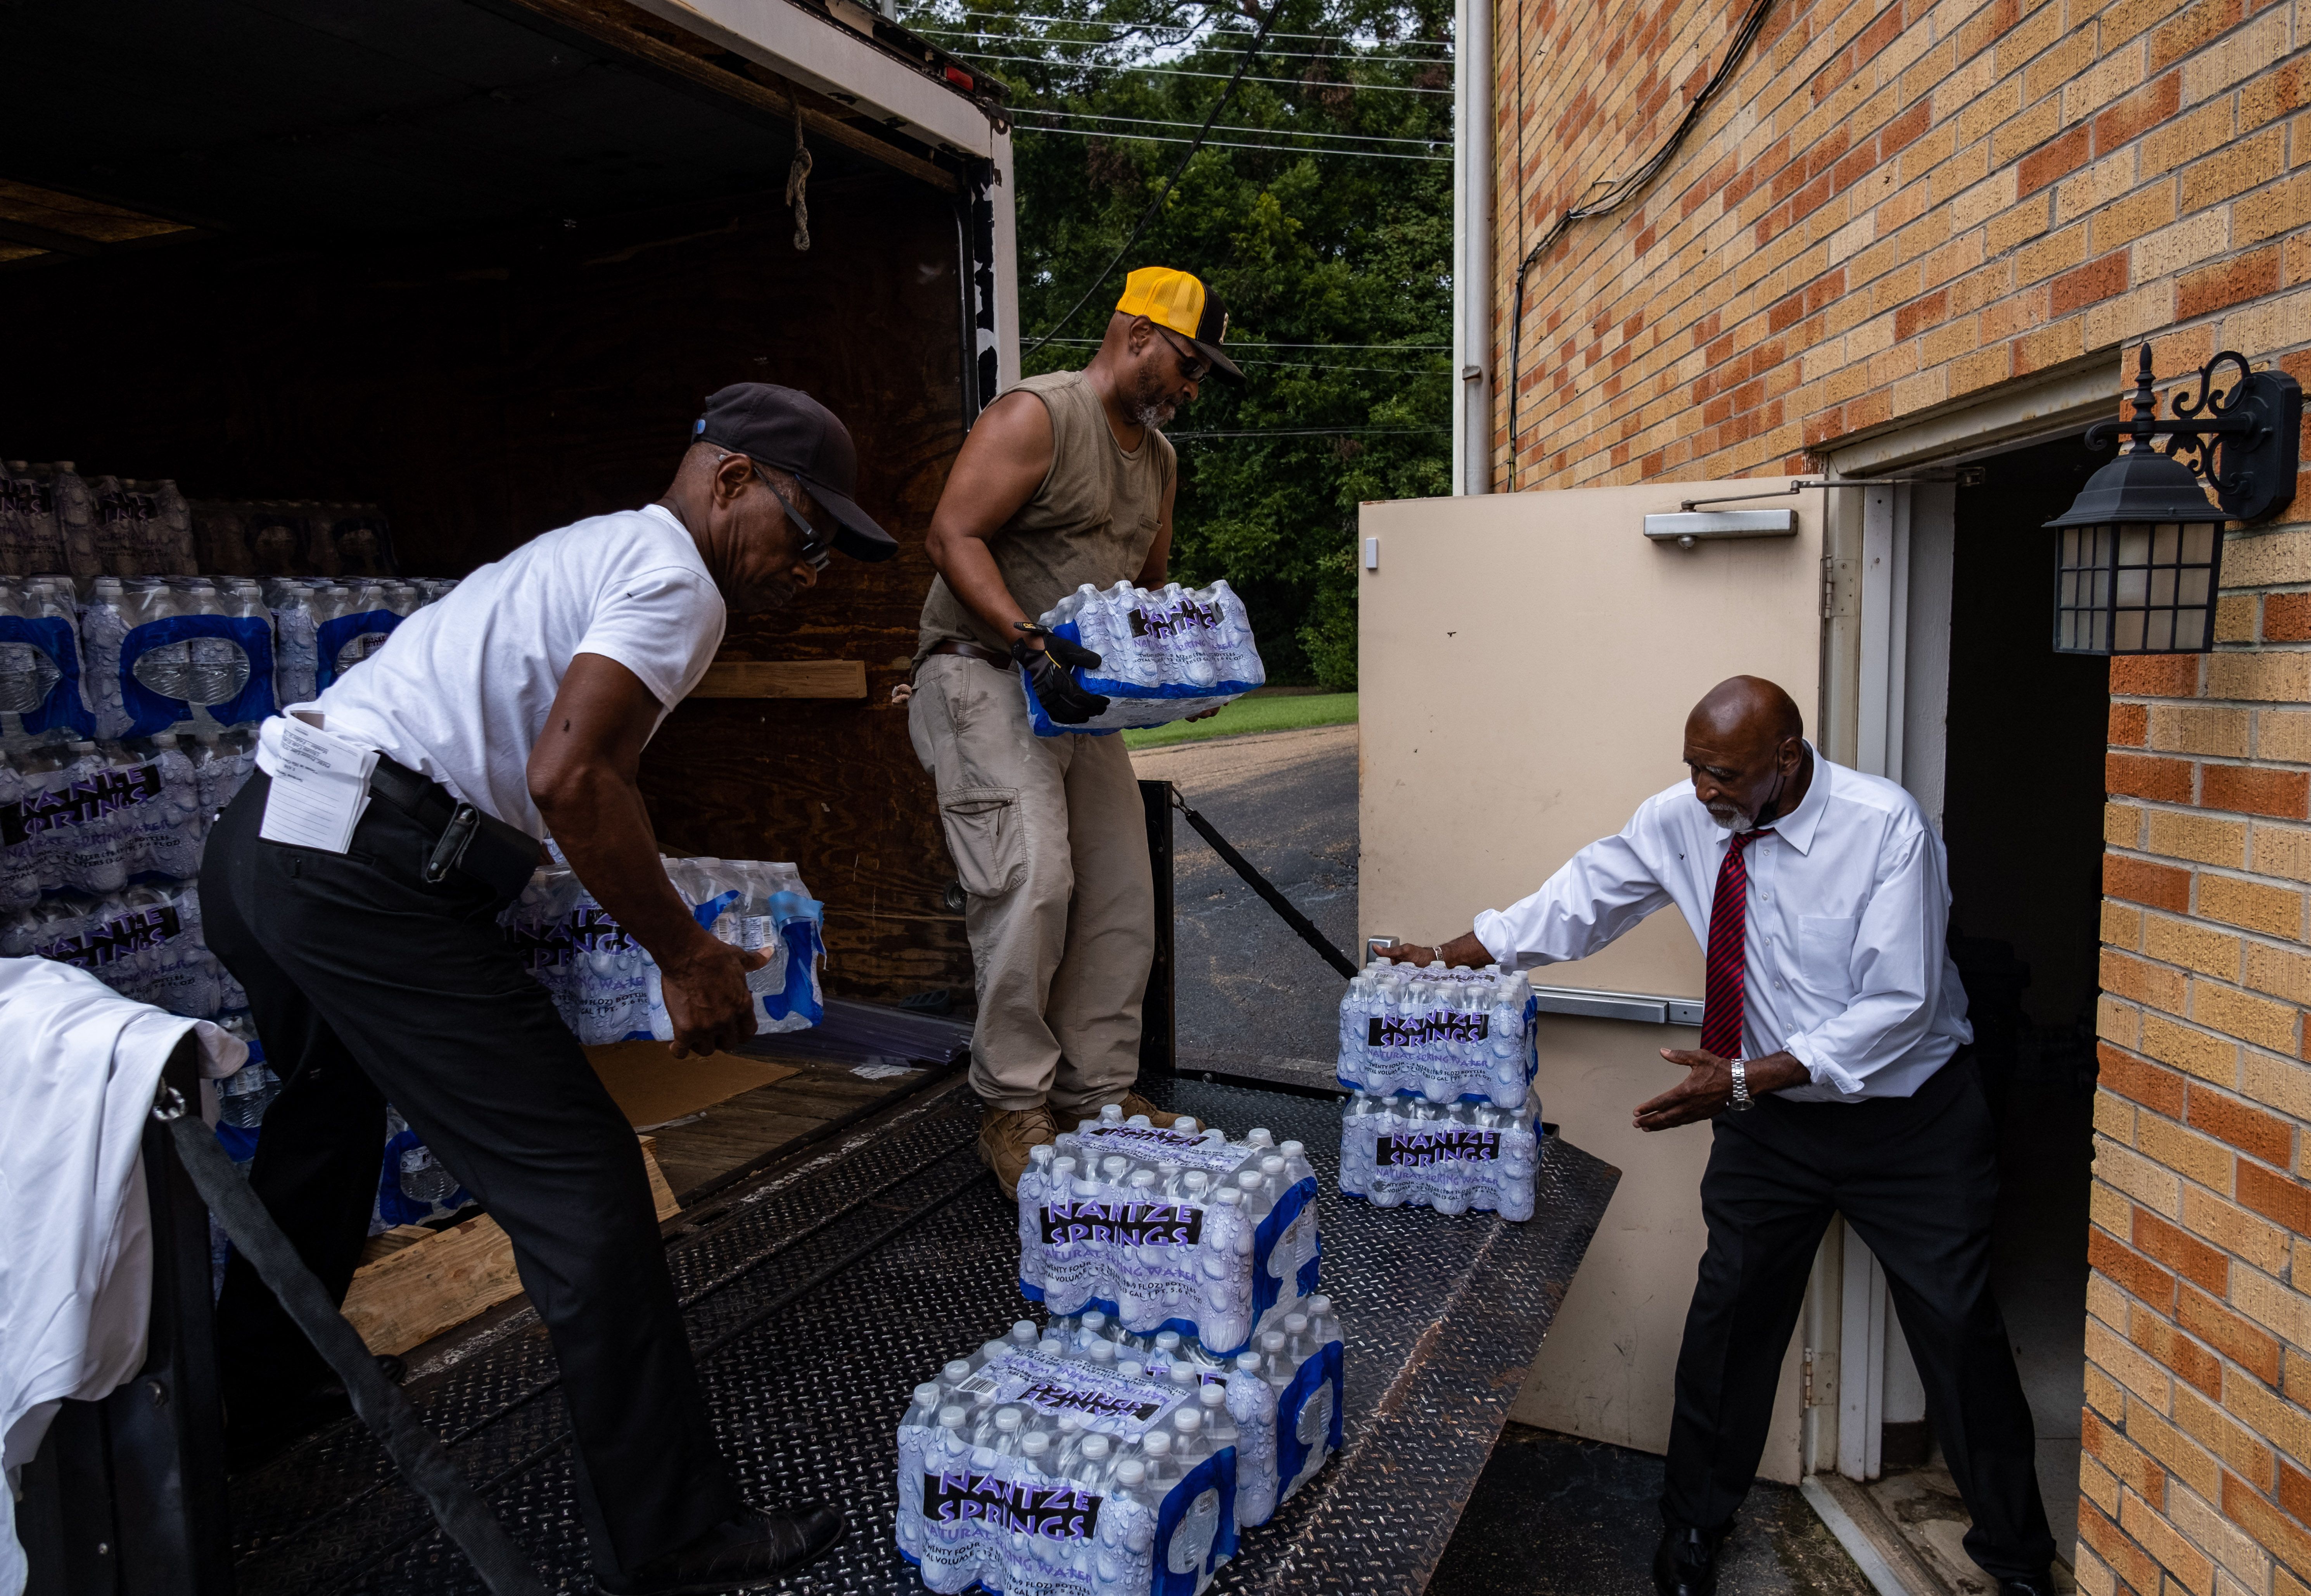 Cases of water arrive at the Progressive Morningstar Baptist Church for distribution